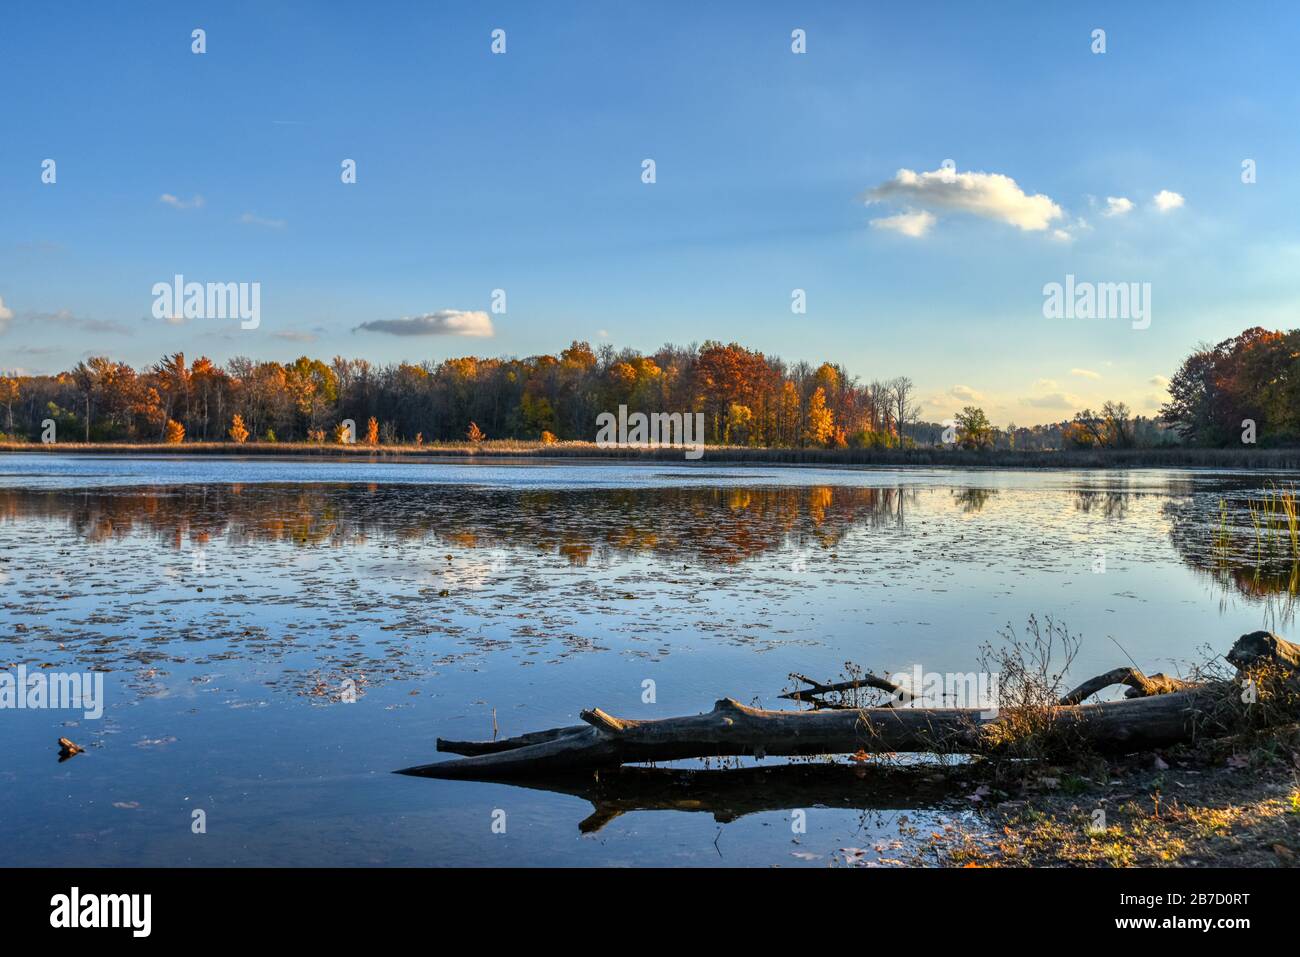 A perfect autumn day with blue skies and autumn trees reflected in a still pond. Stock Photo